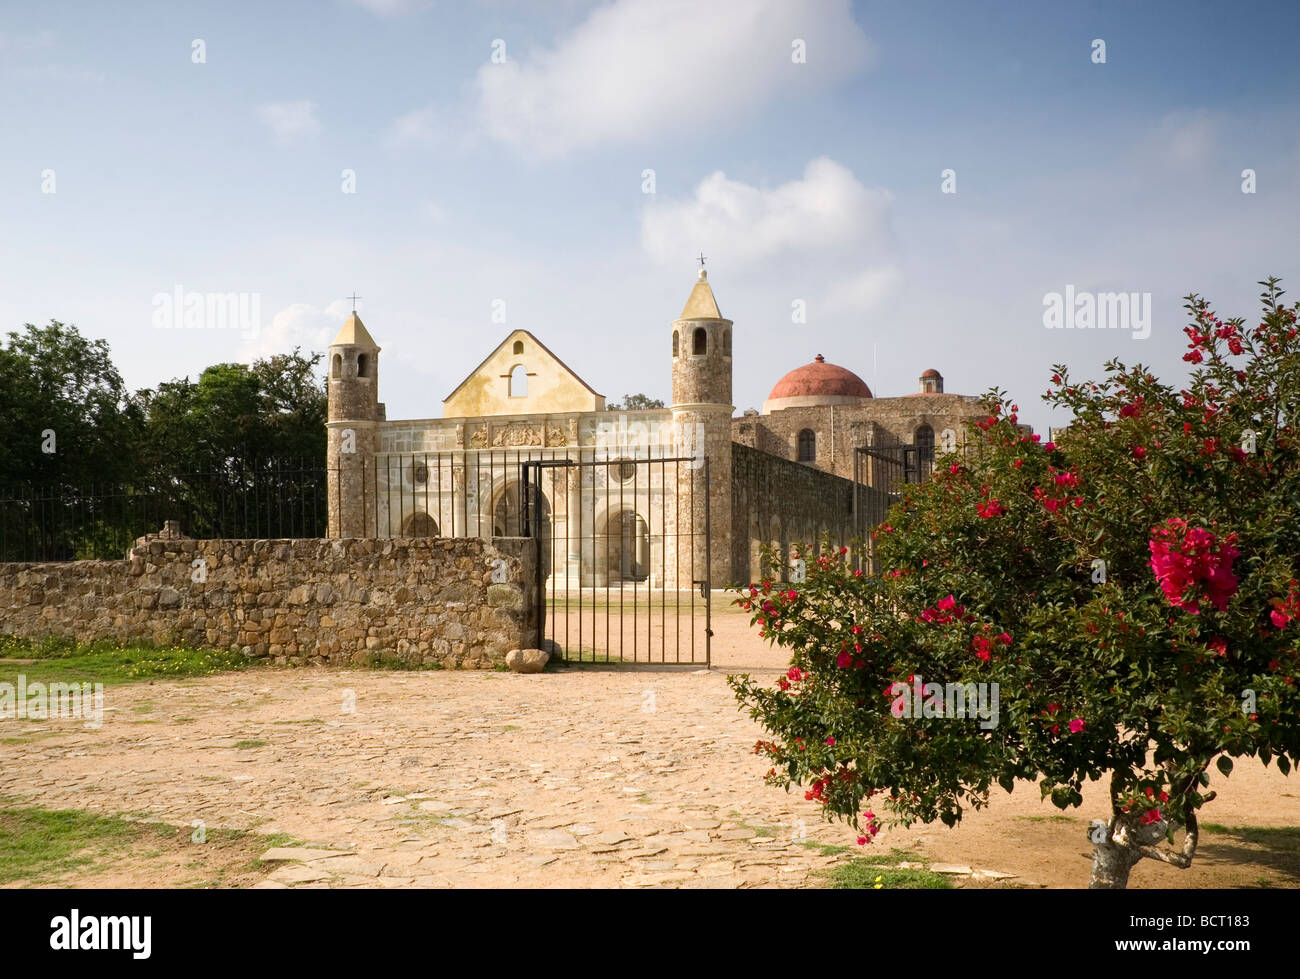 Cuilapan Ex convent, Oaxaca, Mexico: a Dominican Convent built in 1555,  located in the village of Cuilapan, Oaxaca State Stock Photo